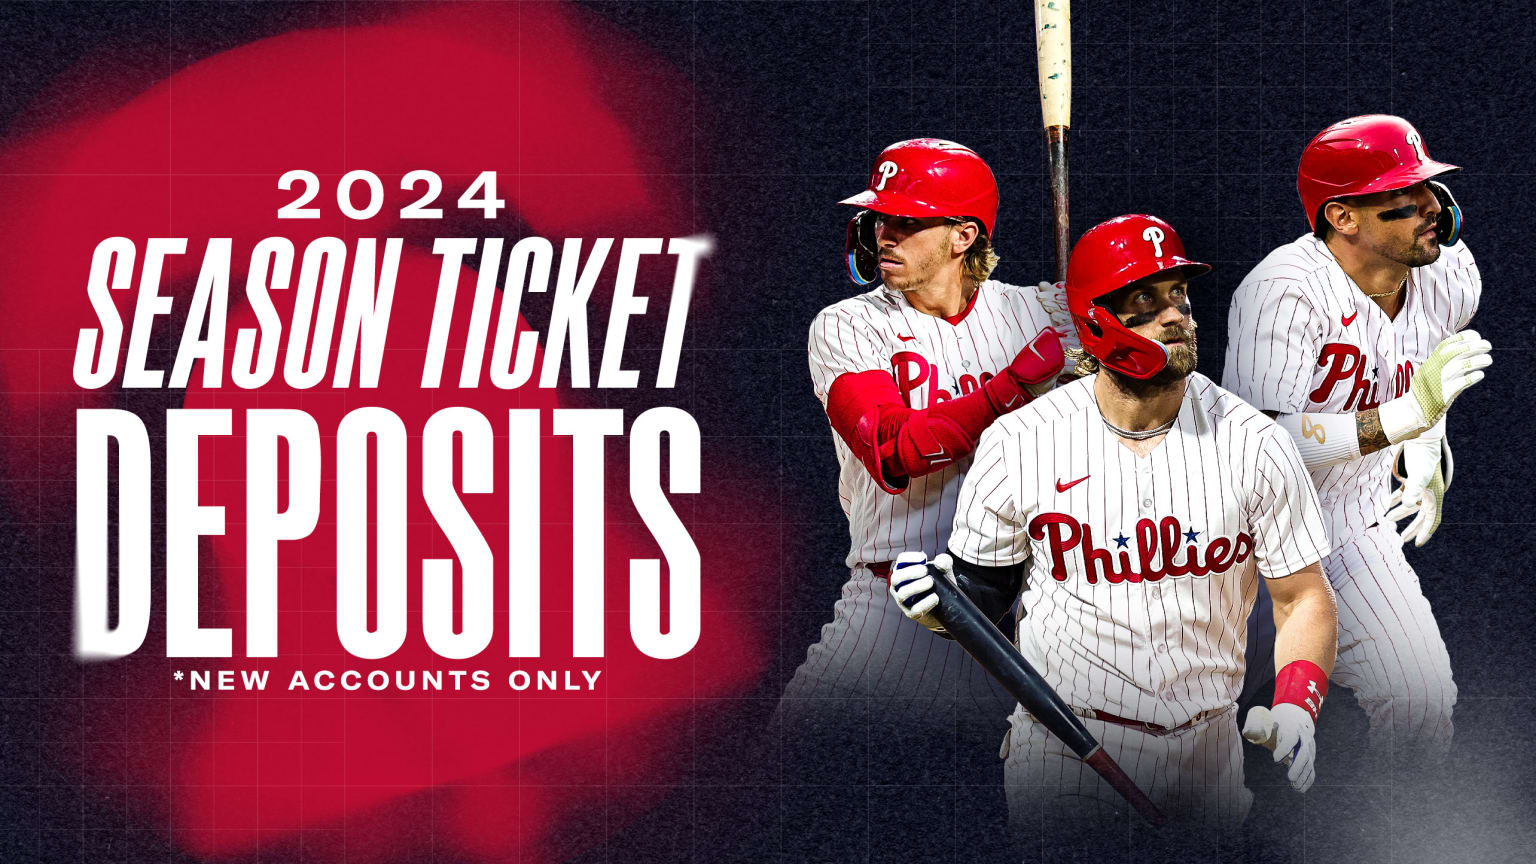 Phillies set LCS record for merchandise sales